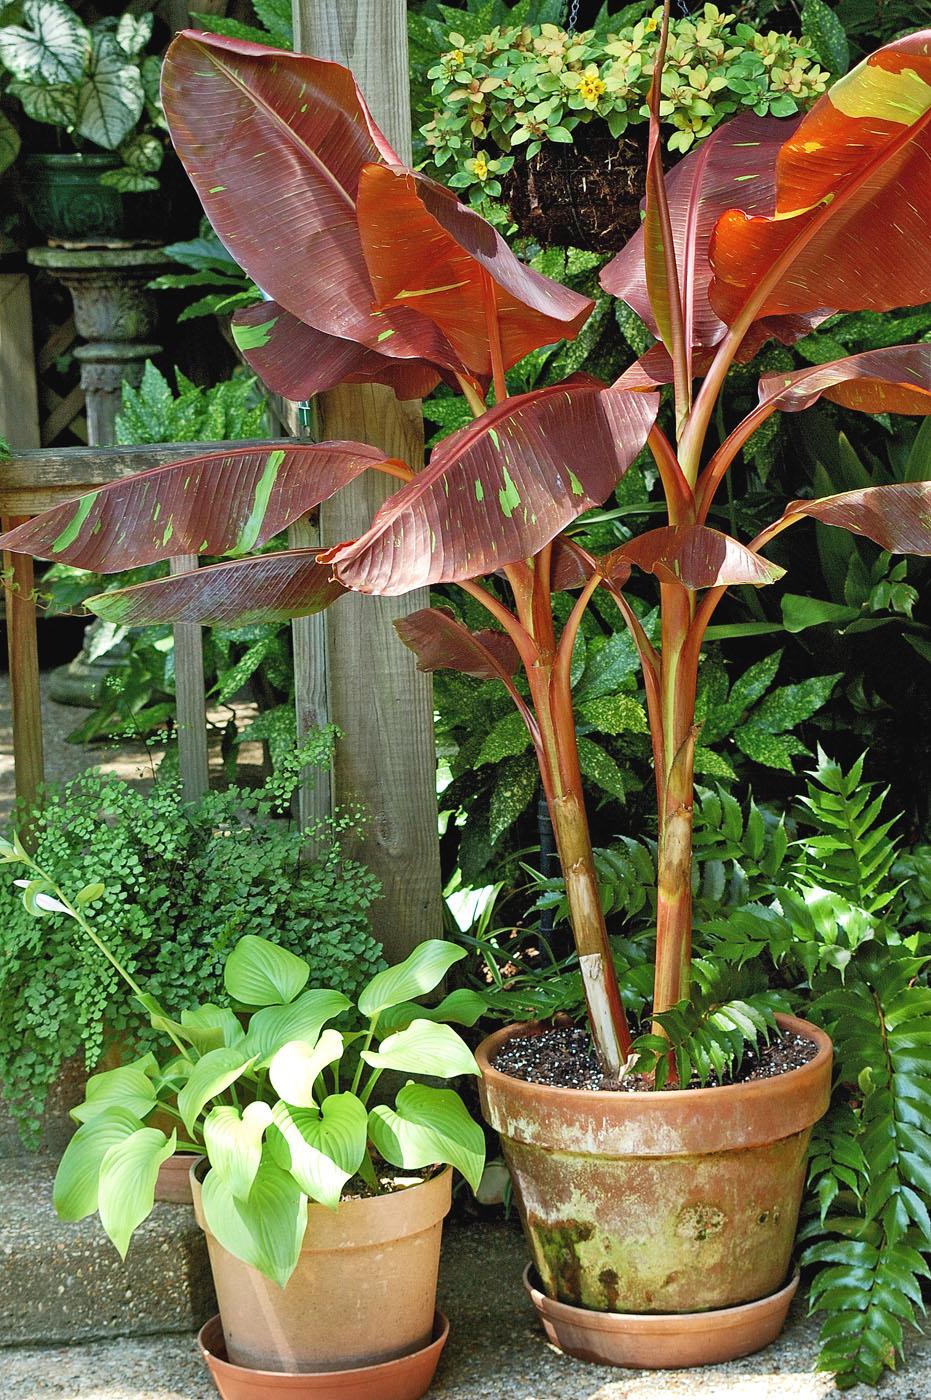 Siam Ruby makes a superb container plant and always grabs attention in the landscape. (Photo by Norman Winter)